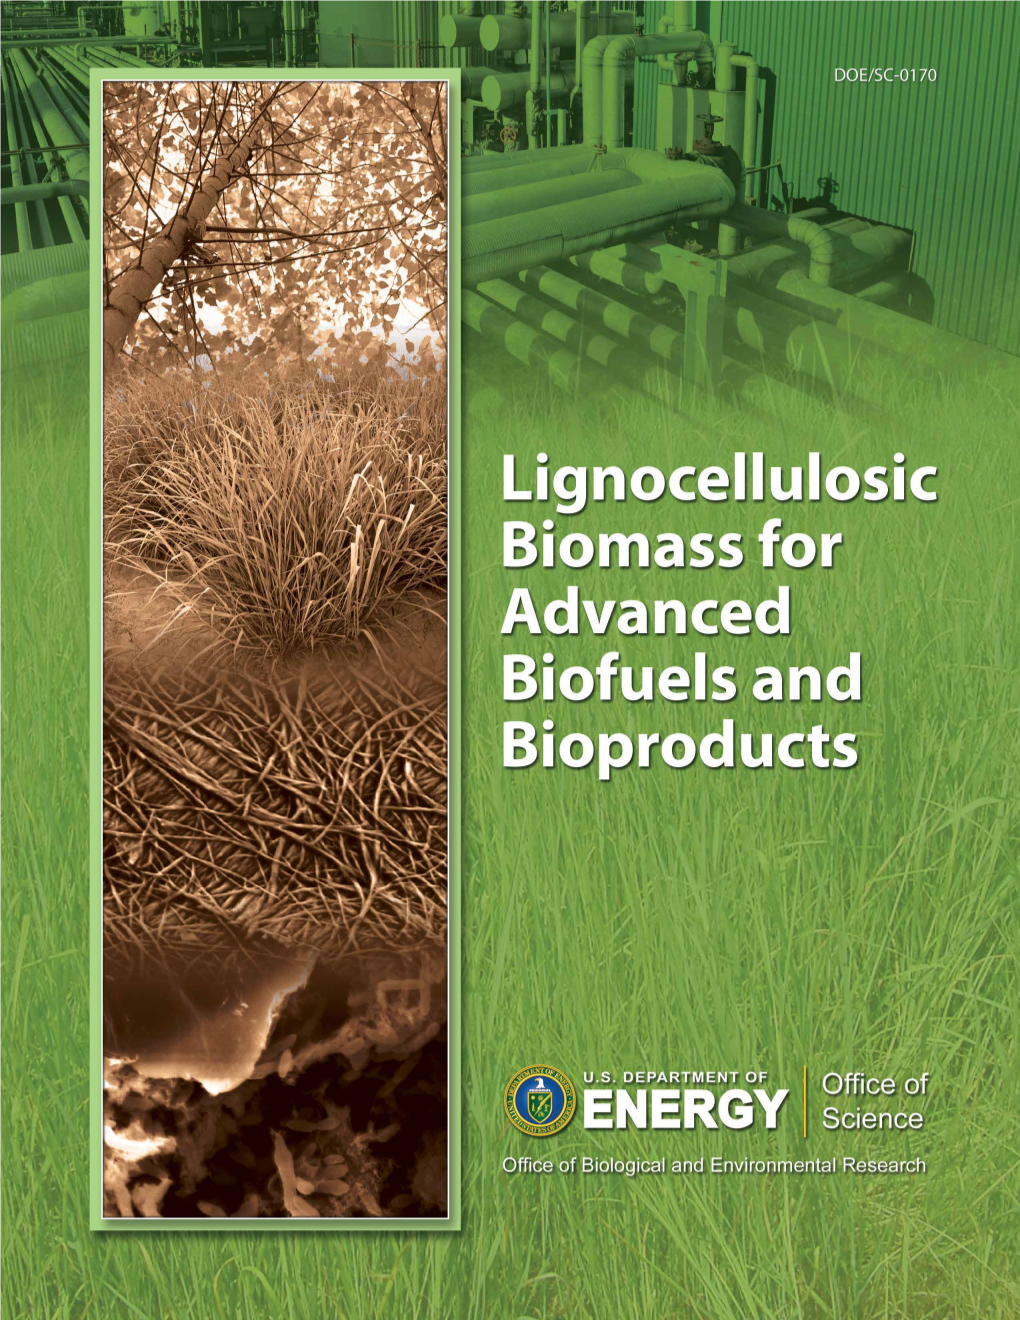 Lignocellulosic Biomass for Advanced Biofuels and Bioproducts: Workshop Report, DOE/SC-0170